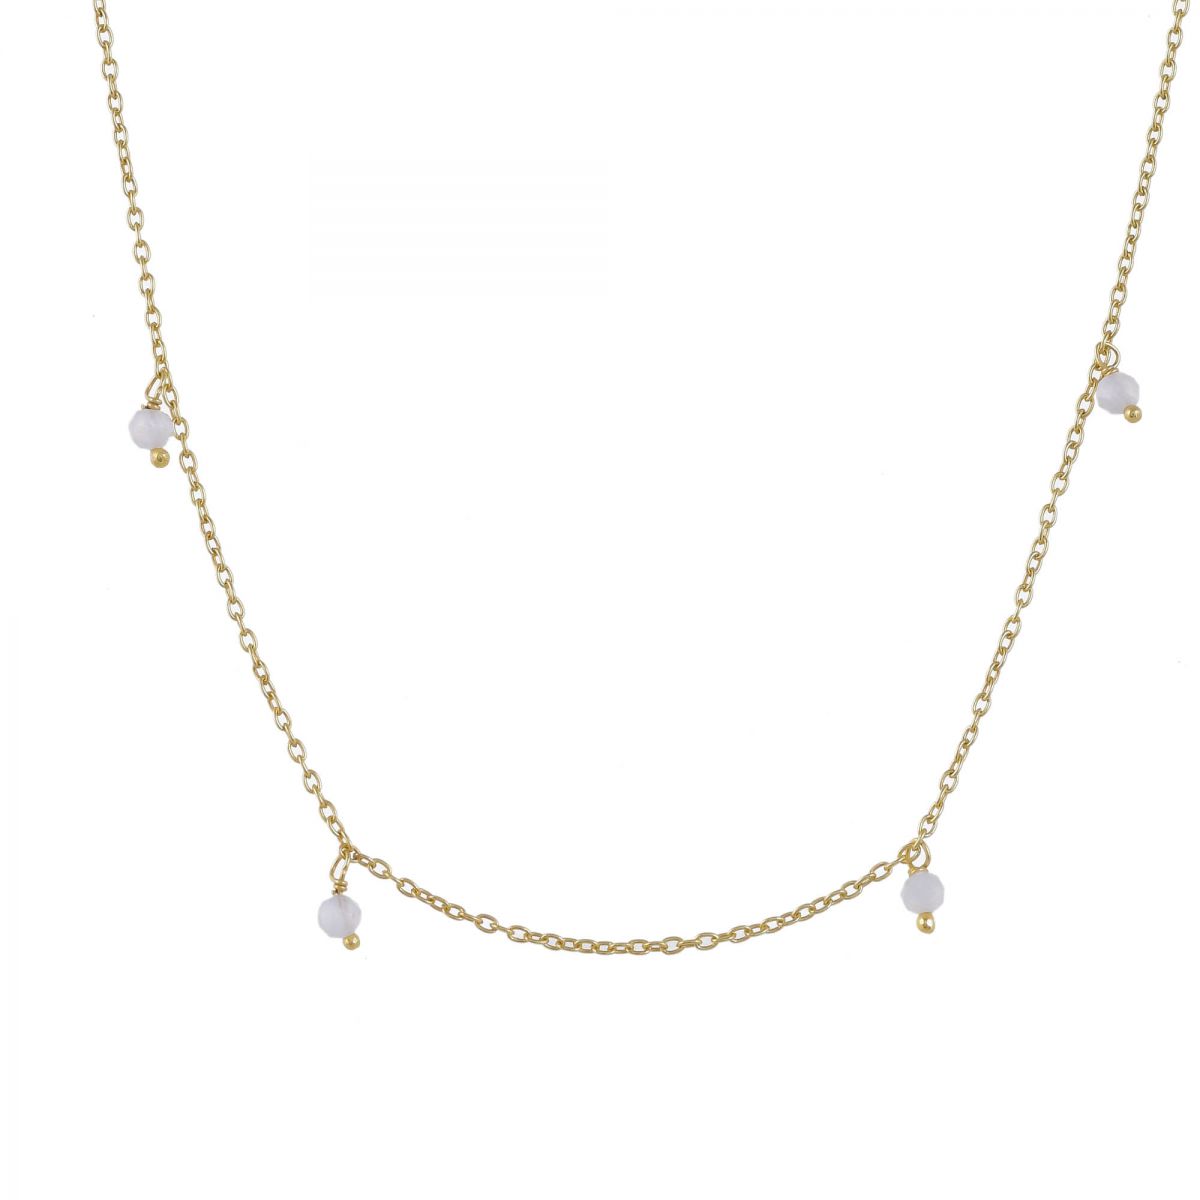 n collier 3mm moonstone beads 90cm gold plated